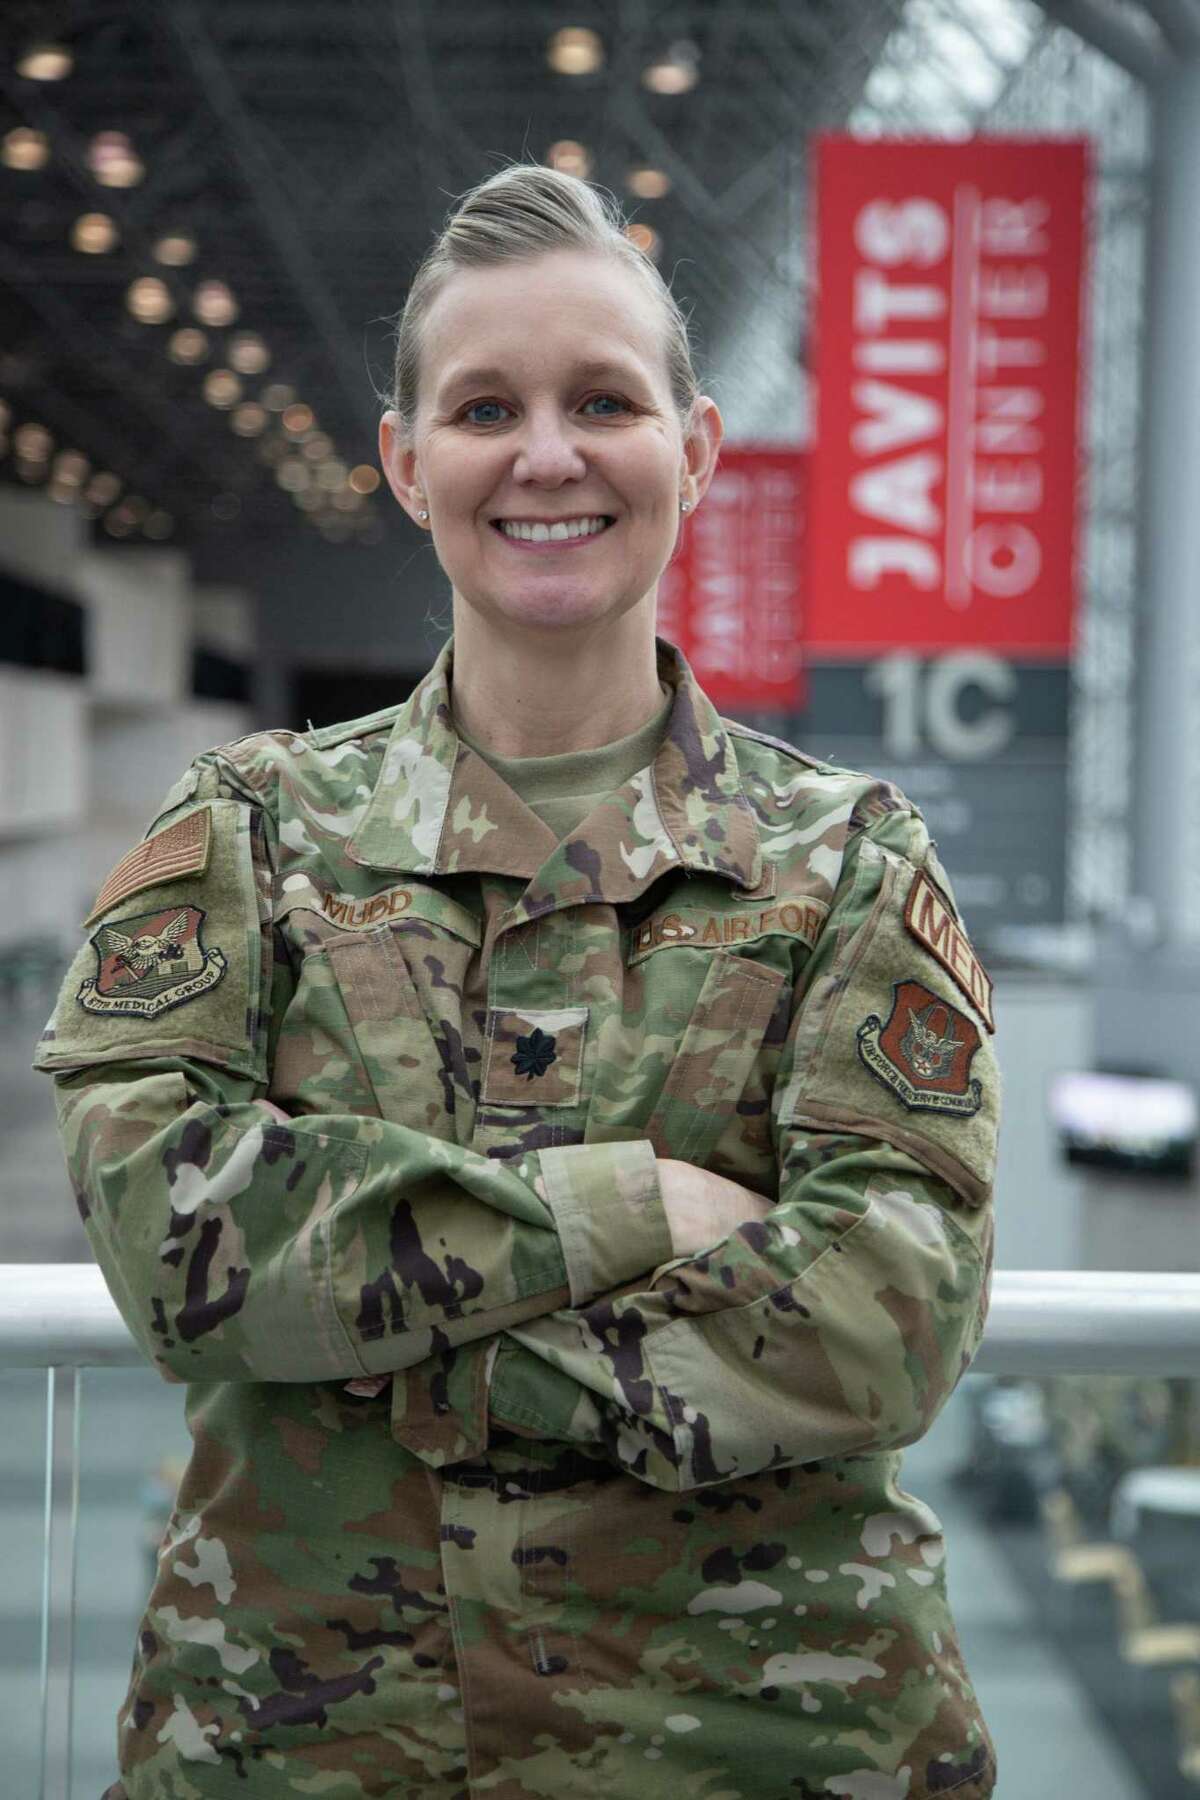 Fort Bend County resident and Air Force Lt. Col. Angella Mudd is currently in New York City helping to fight the COVID-19 pandemic.